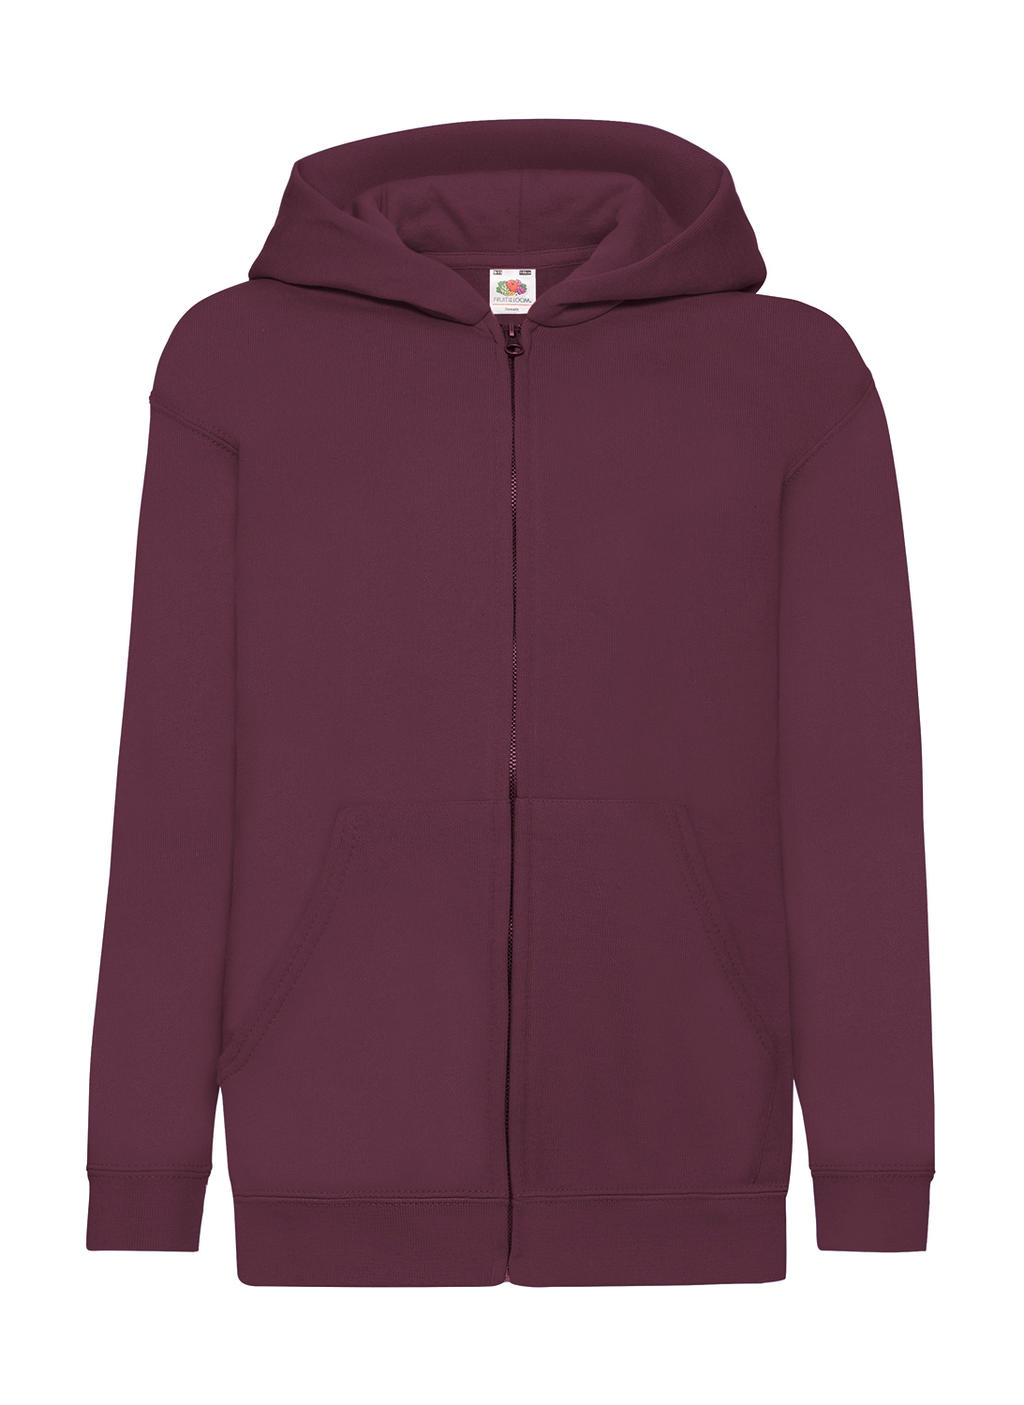  Kids Classic Hooded Sweat Jacket in Farbe Burgundy